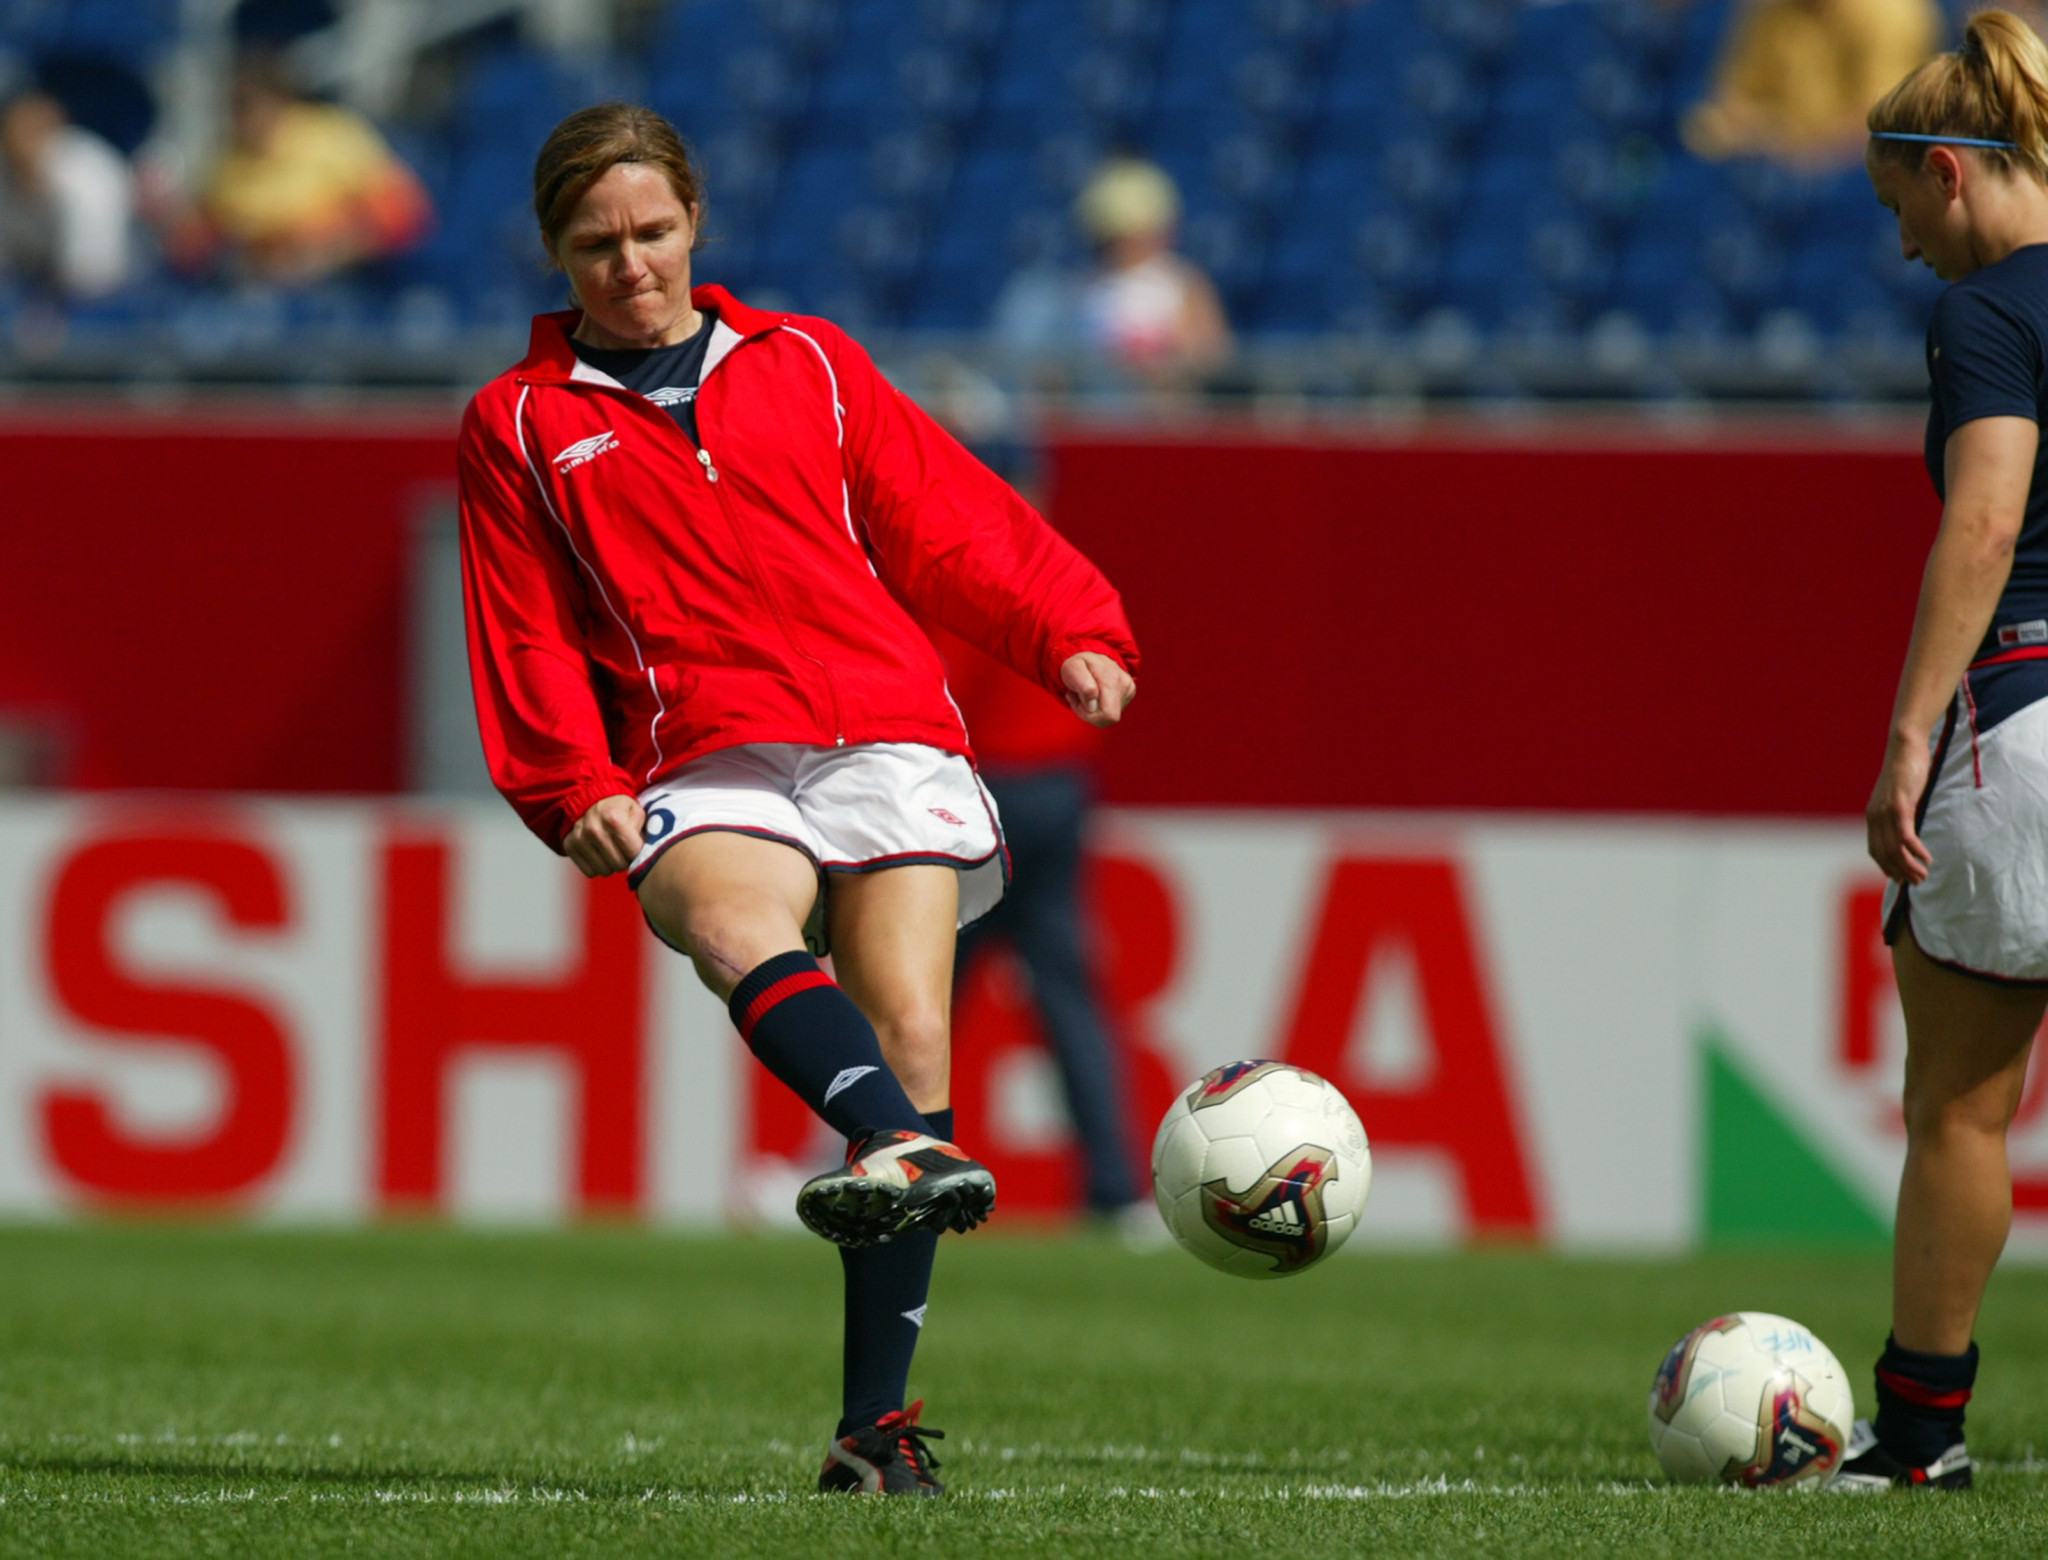 Hege Riise was part of the Norwegian team that won gold at Sydney 2000 ©Getty Images 